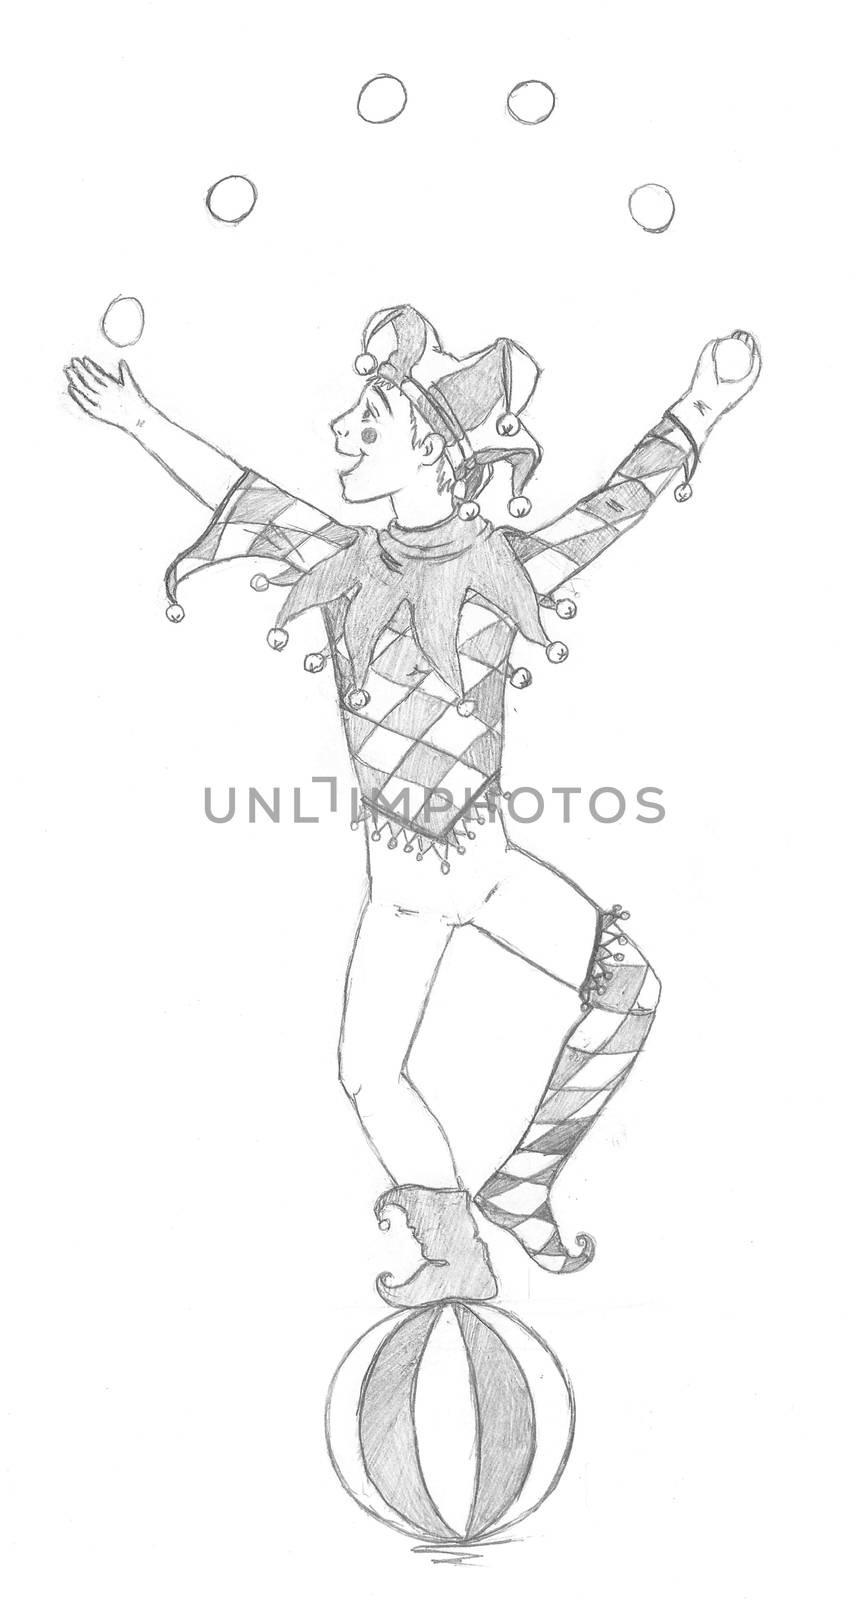 The clown in the circus juggling. Scanned sketch in pencil